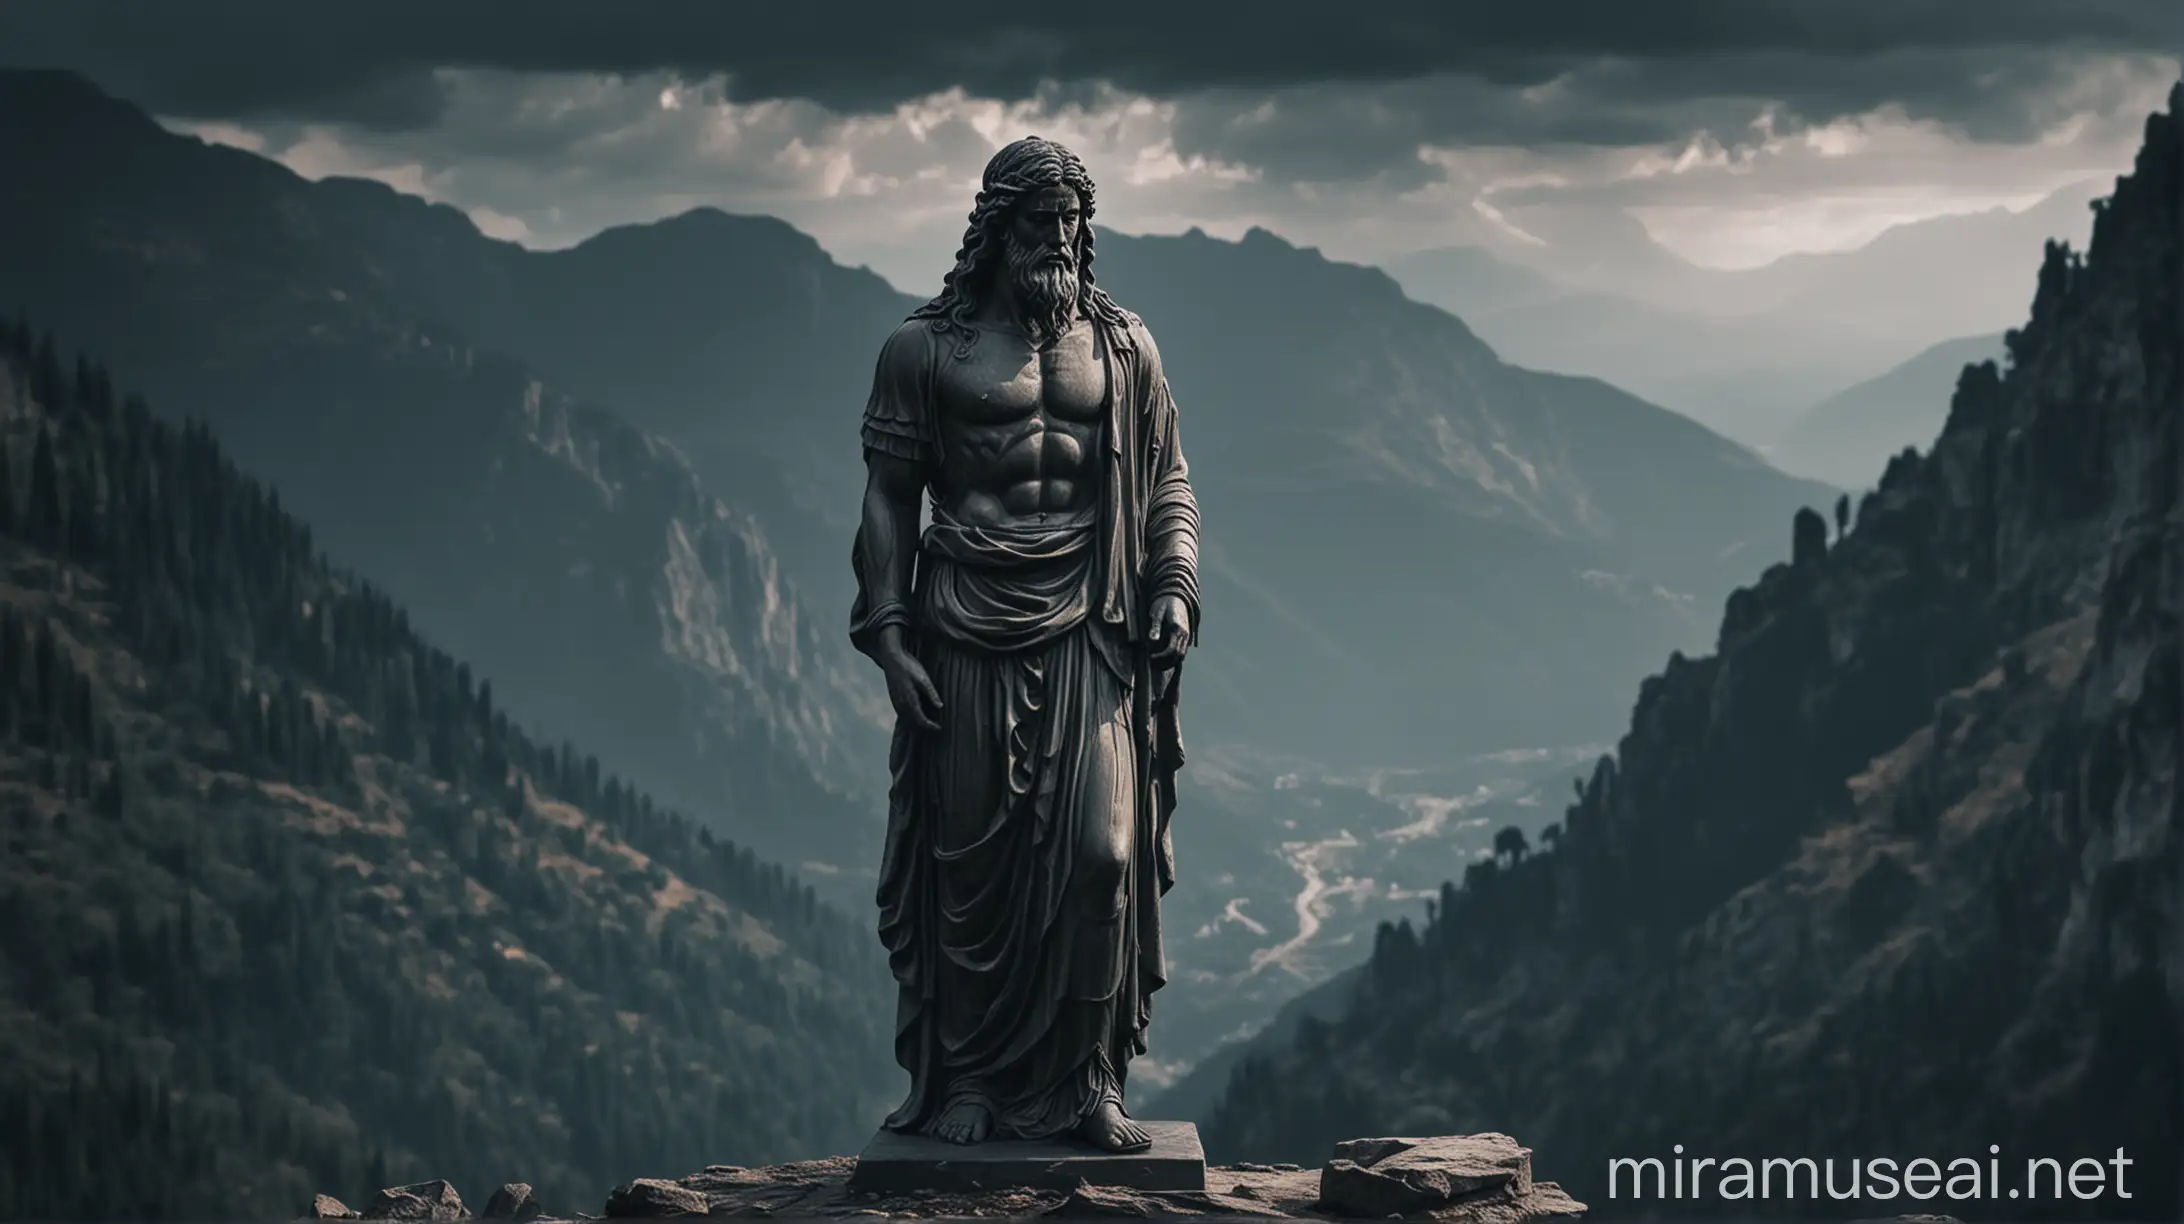 Stoic statue(dark) with long hair standing in the mountains. 